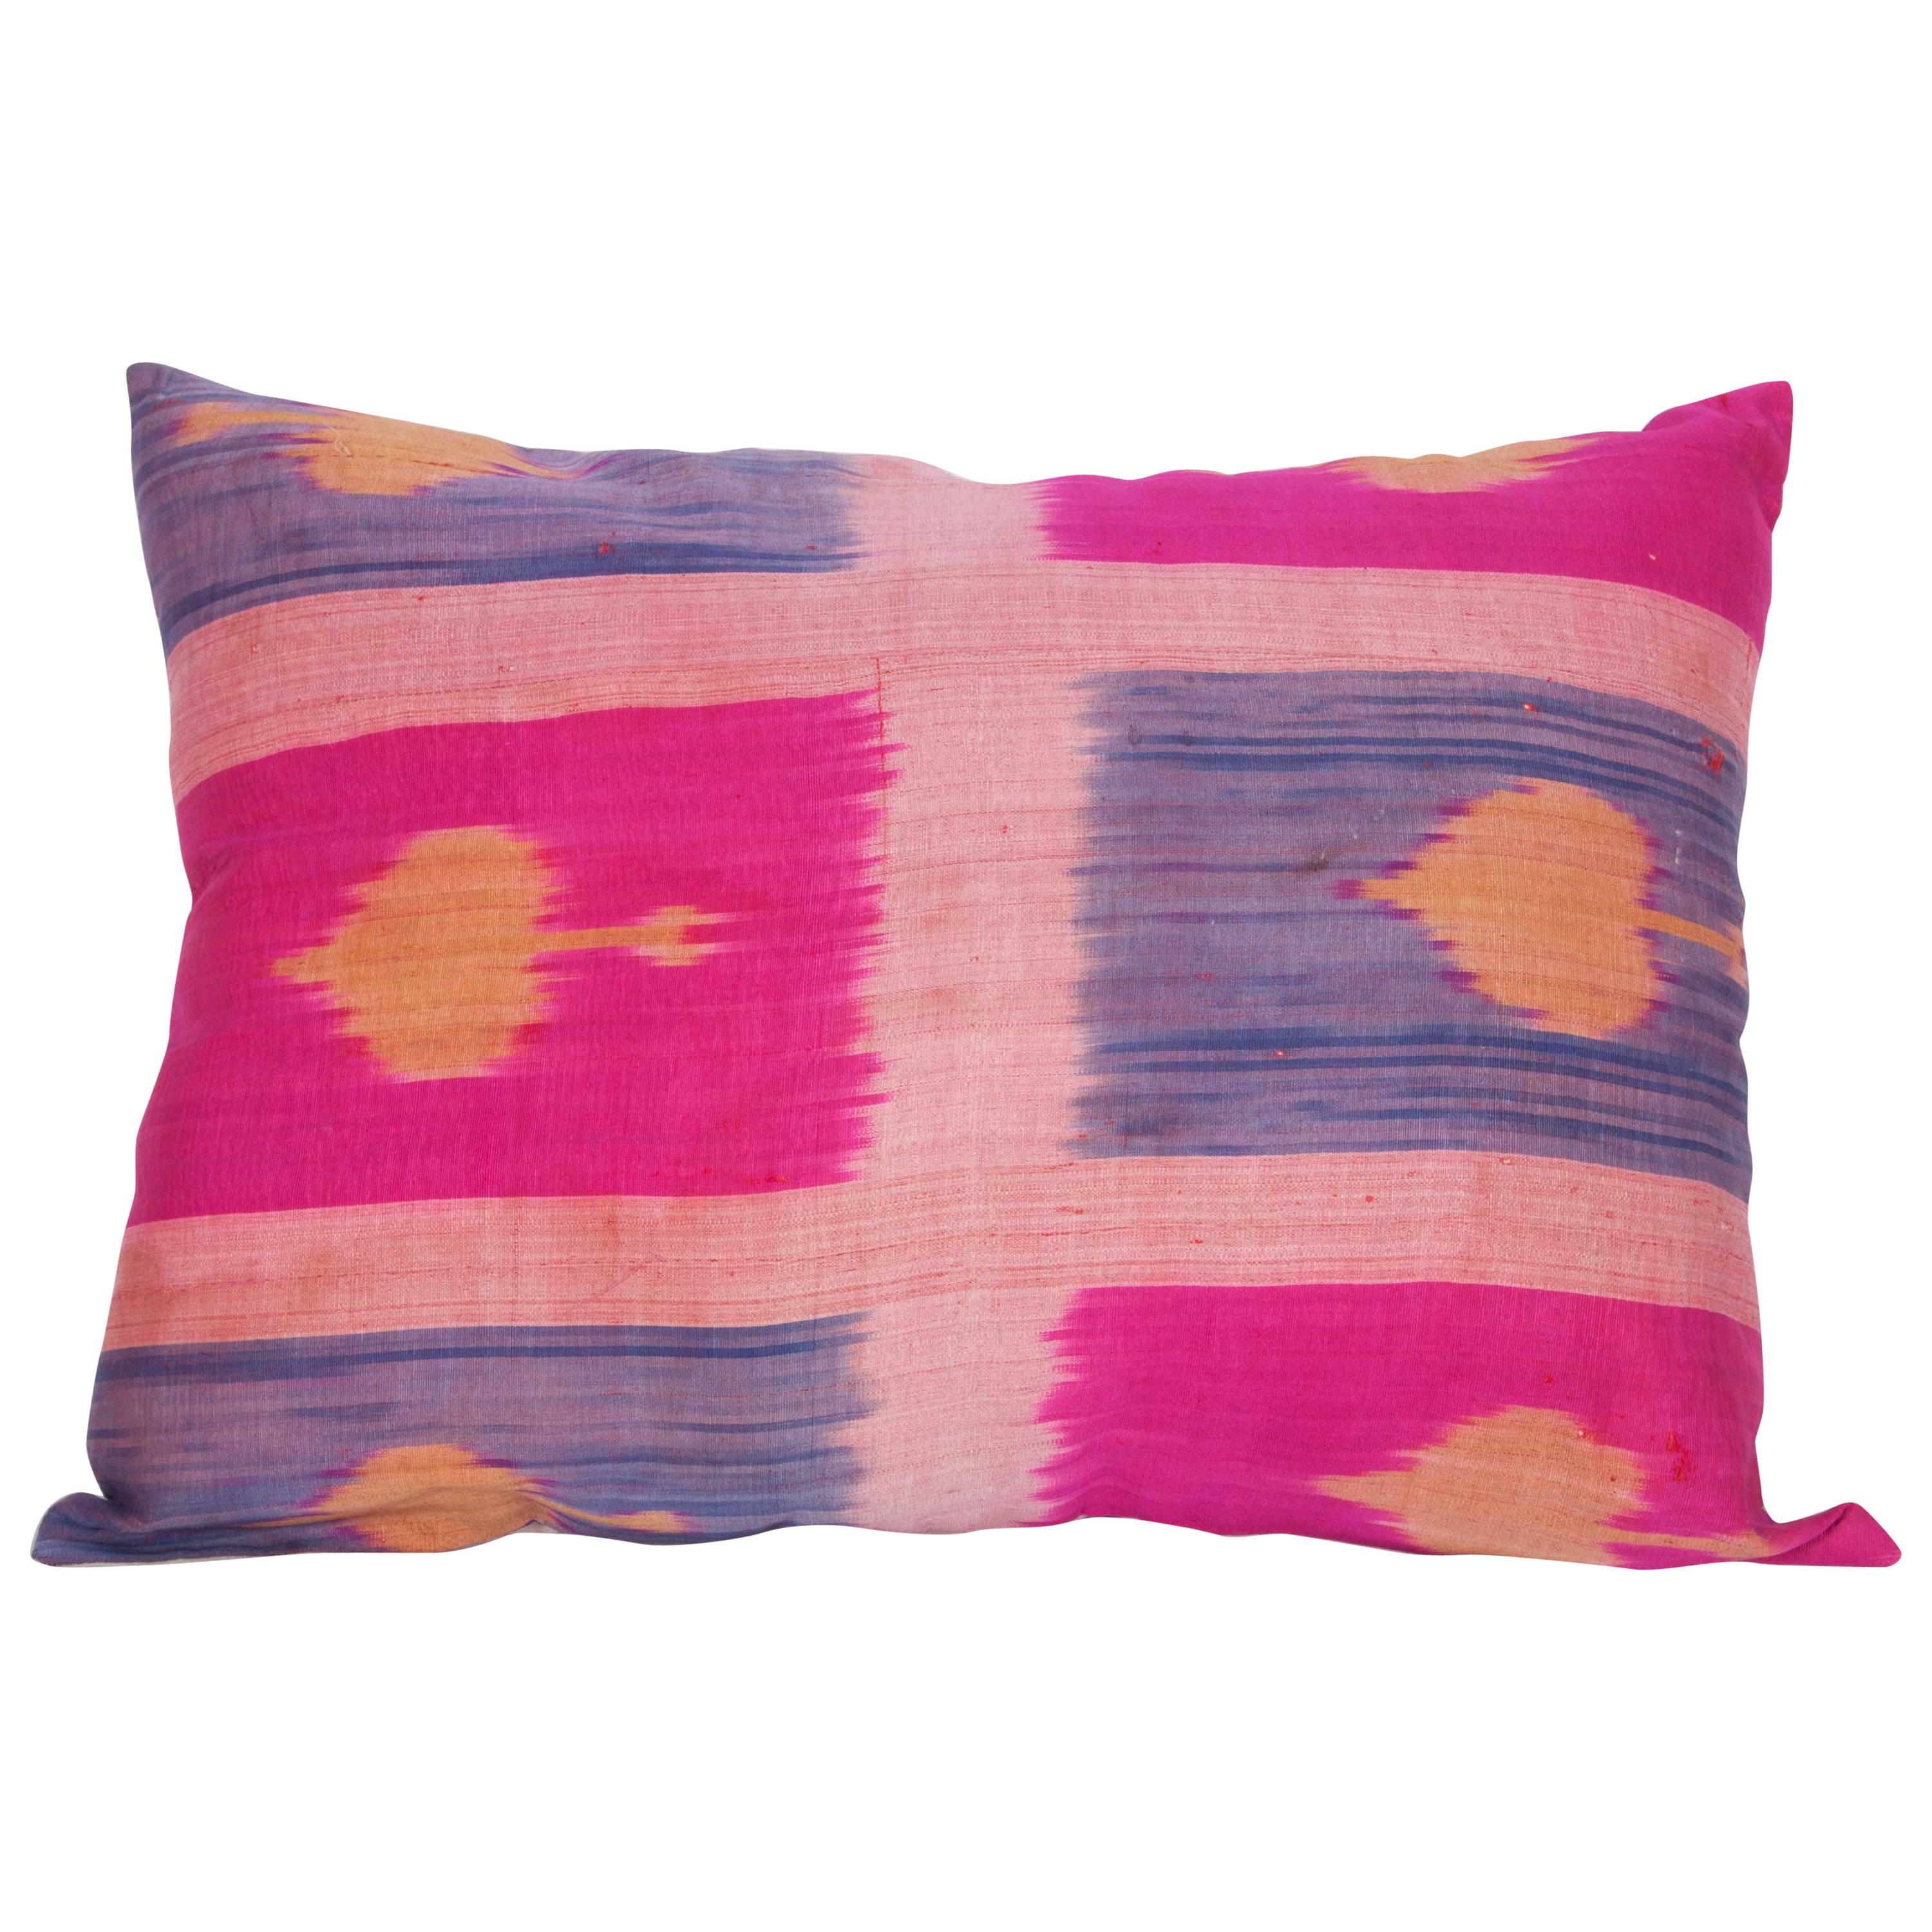 Antique Ikat Pillow Case Fashioned from an Early 20th Century Uzbek Ikat